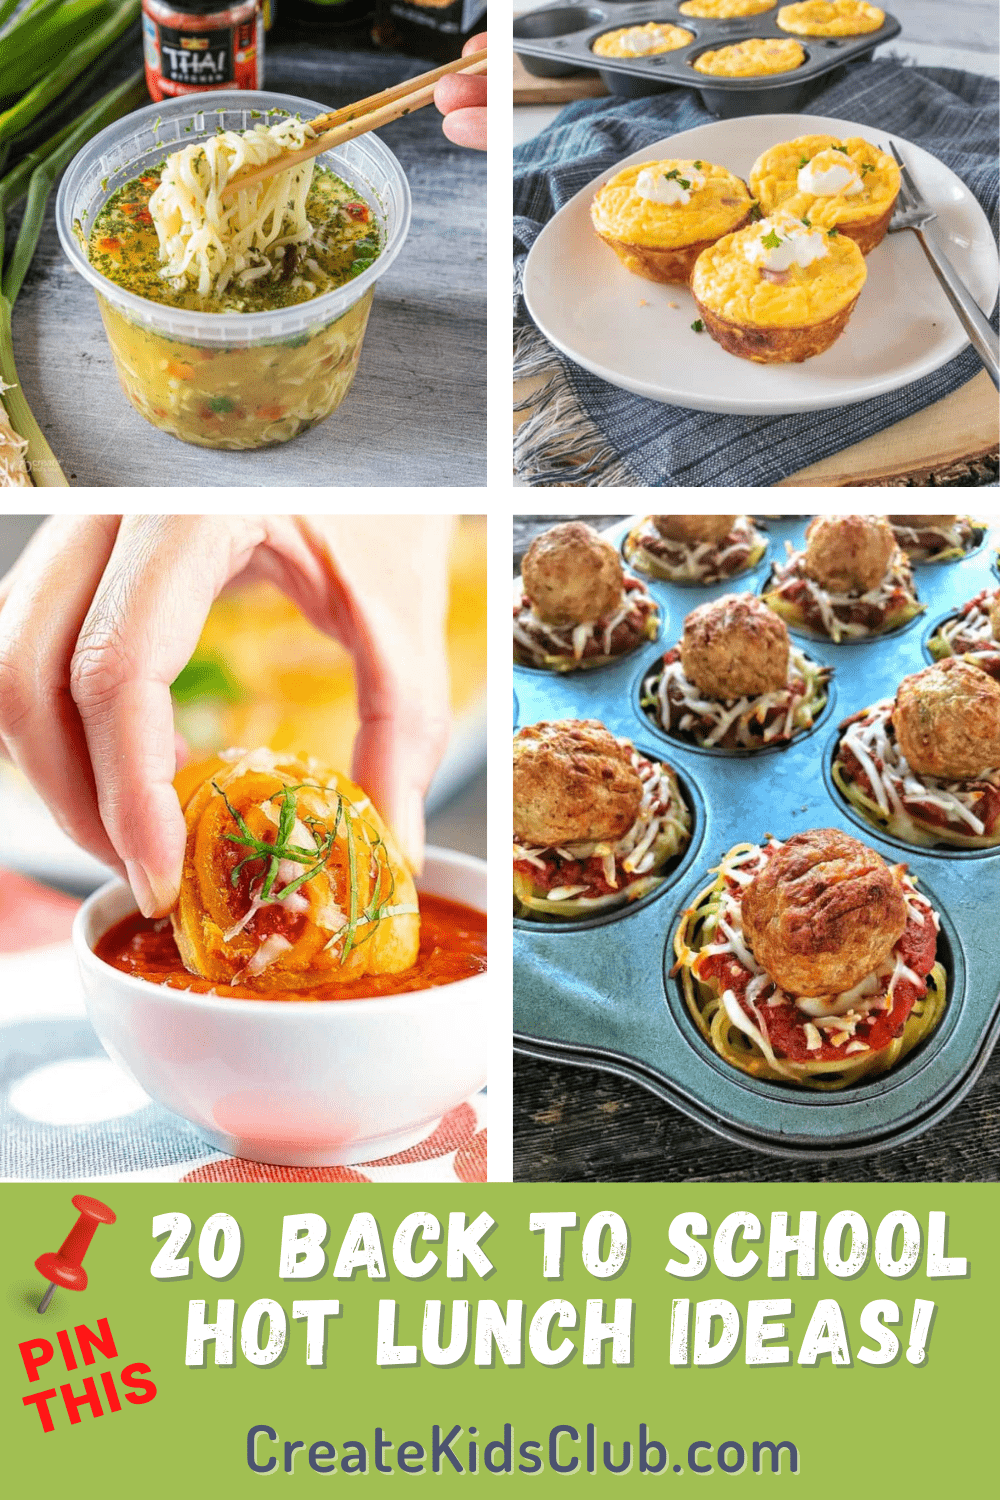 20 Back to School Hot Lunch Ideas